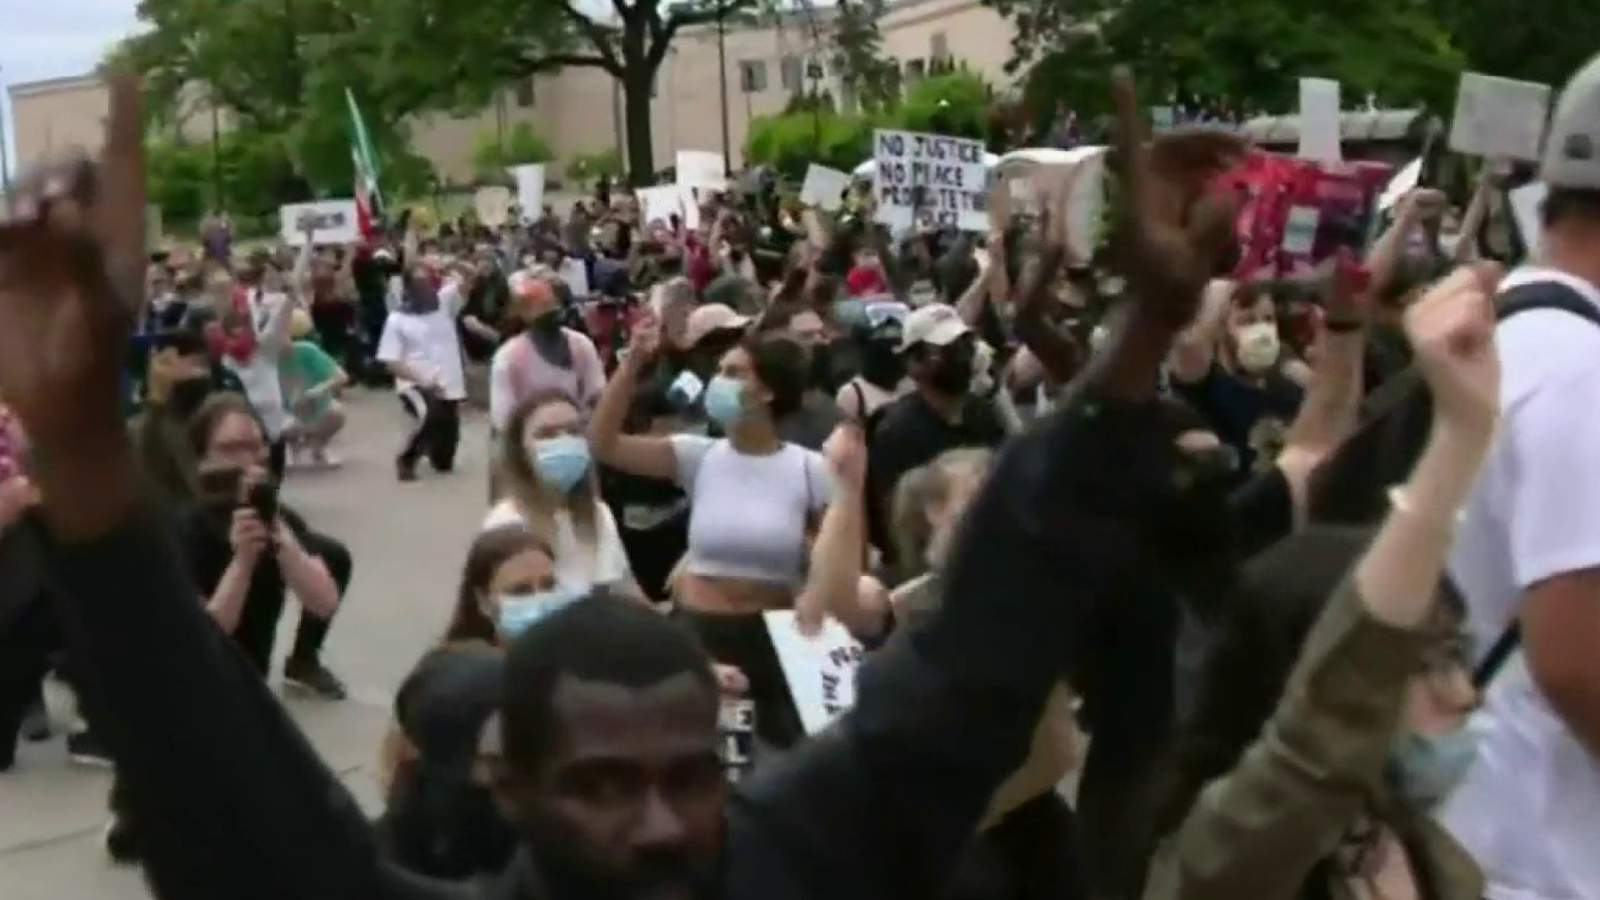 22-year-old woman diffuses tension, chaos during Detroit protests